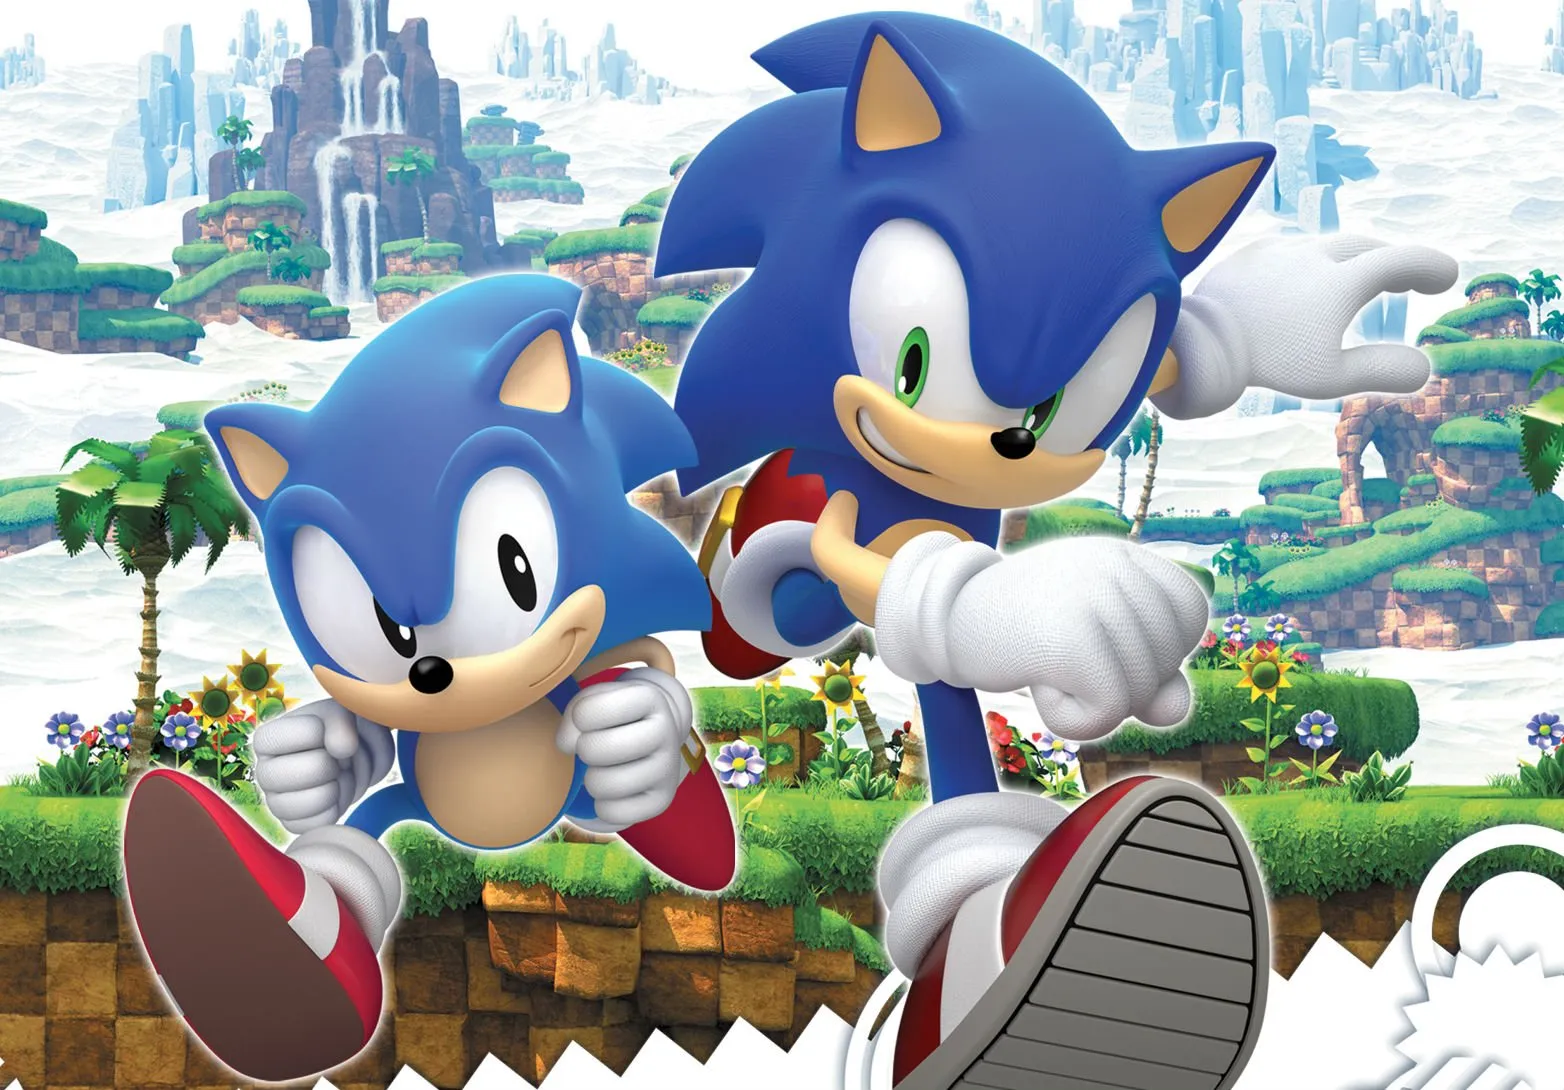 Sonic Classic Heroes - Sonic following Tails - Death Egg/Ending